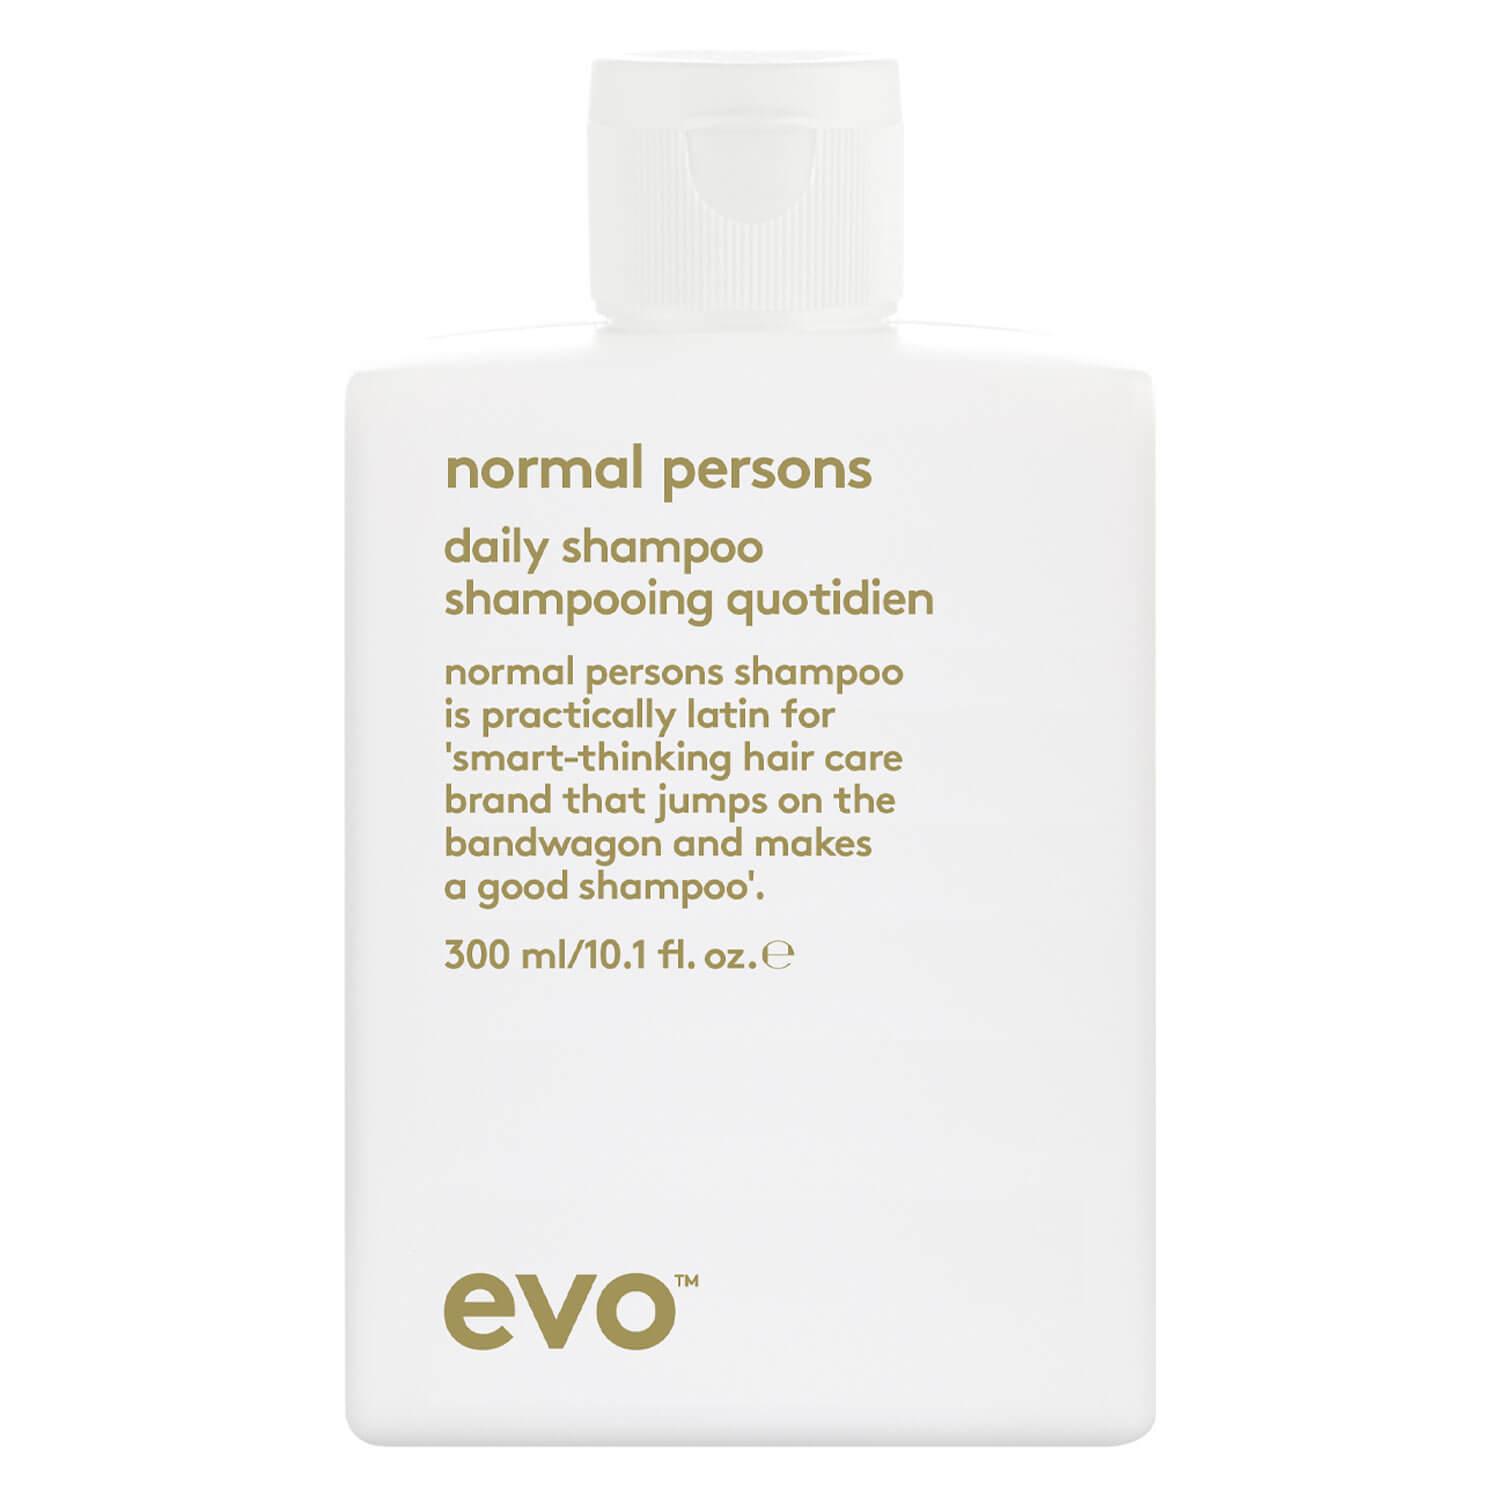 evo care - normal persons daily shampoo